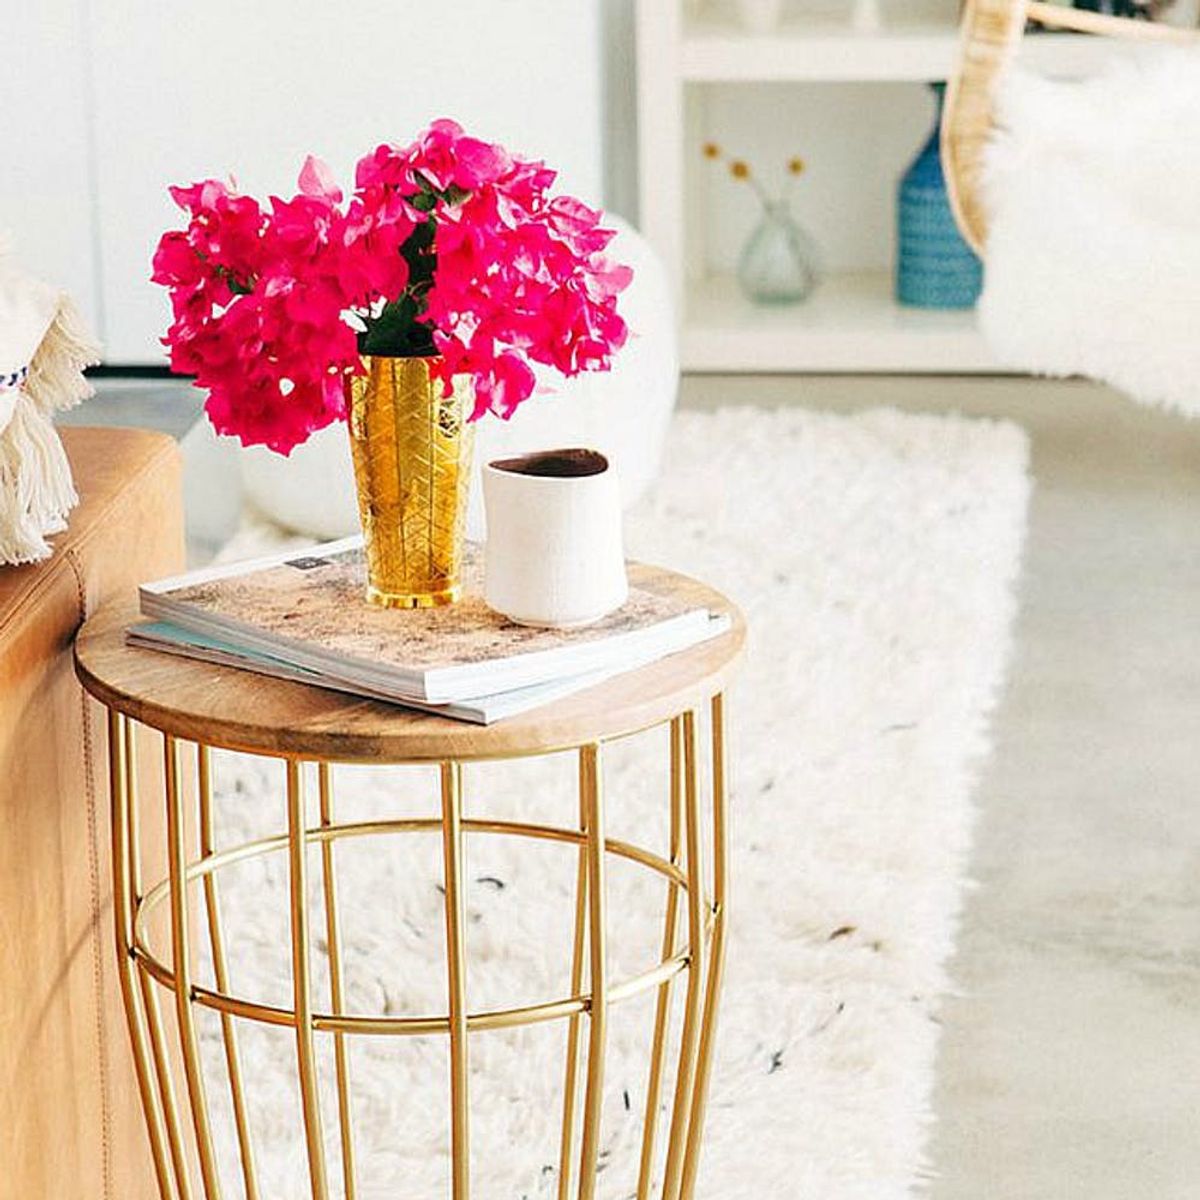 15 Side Table Styling Tips